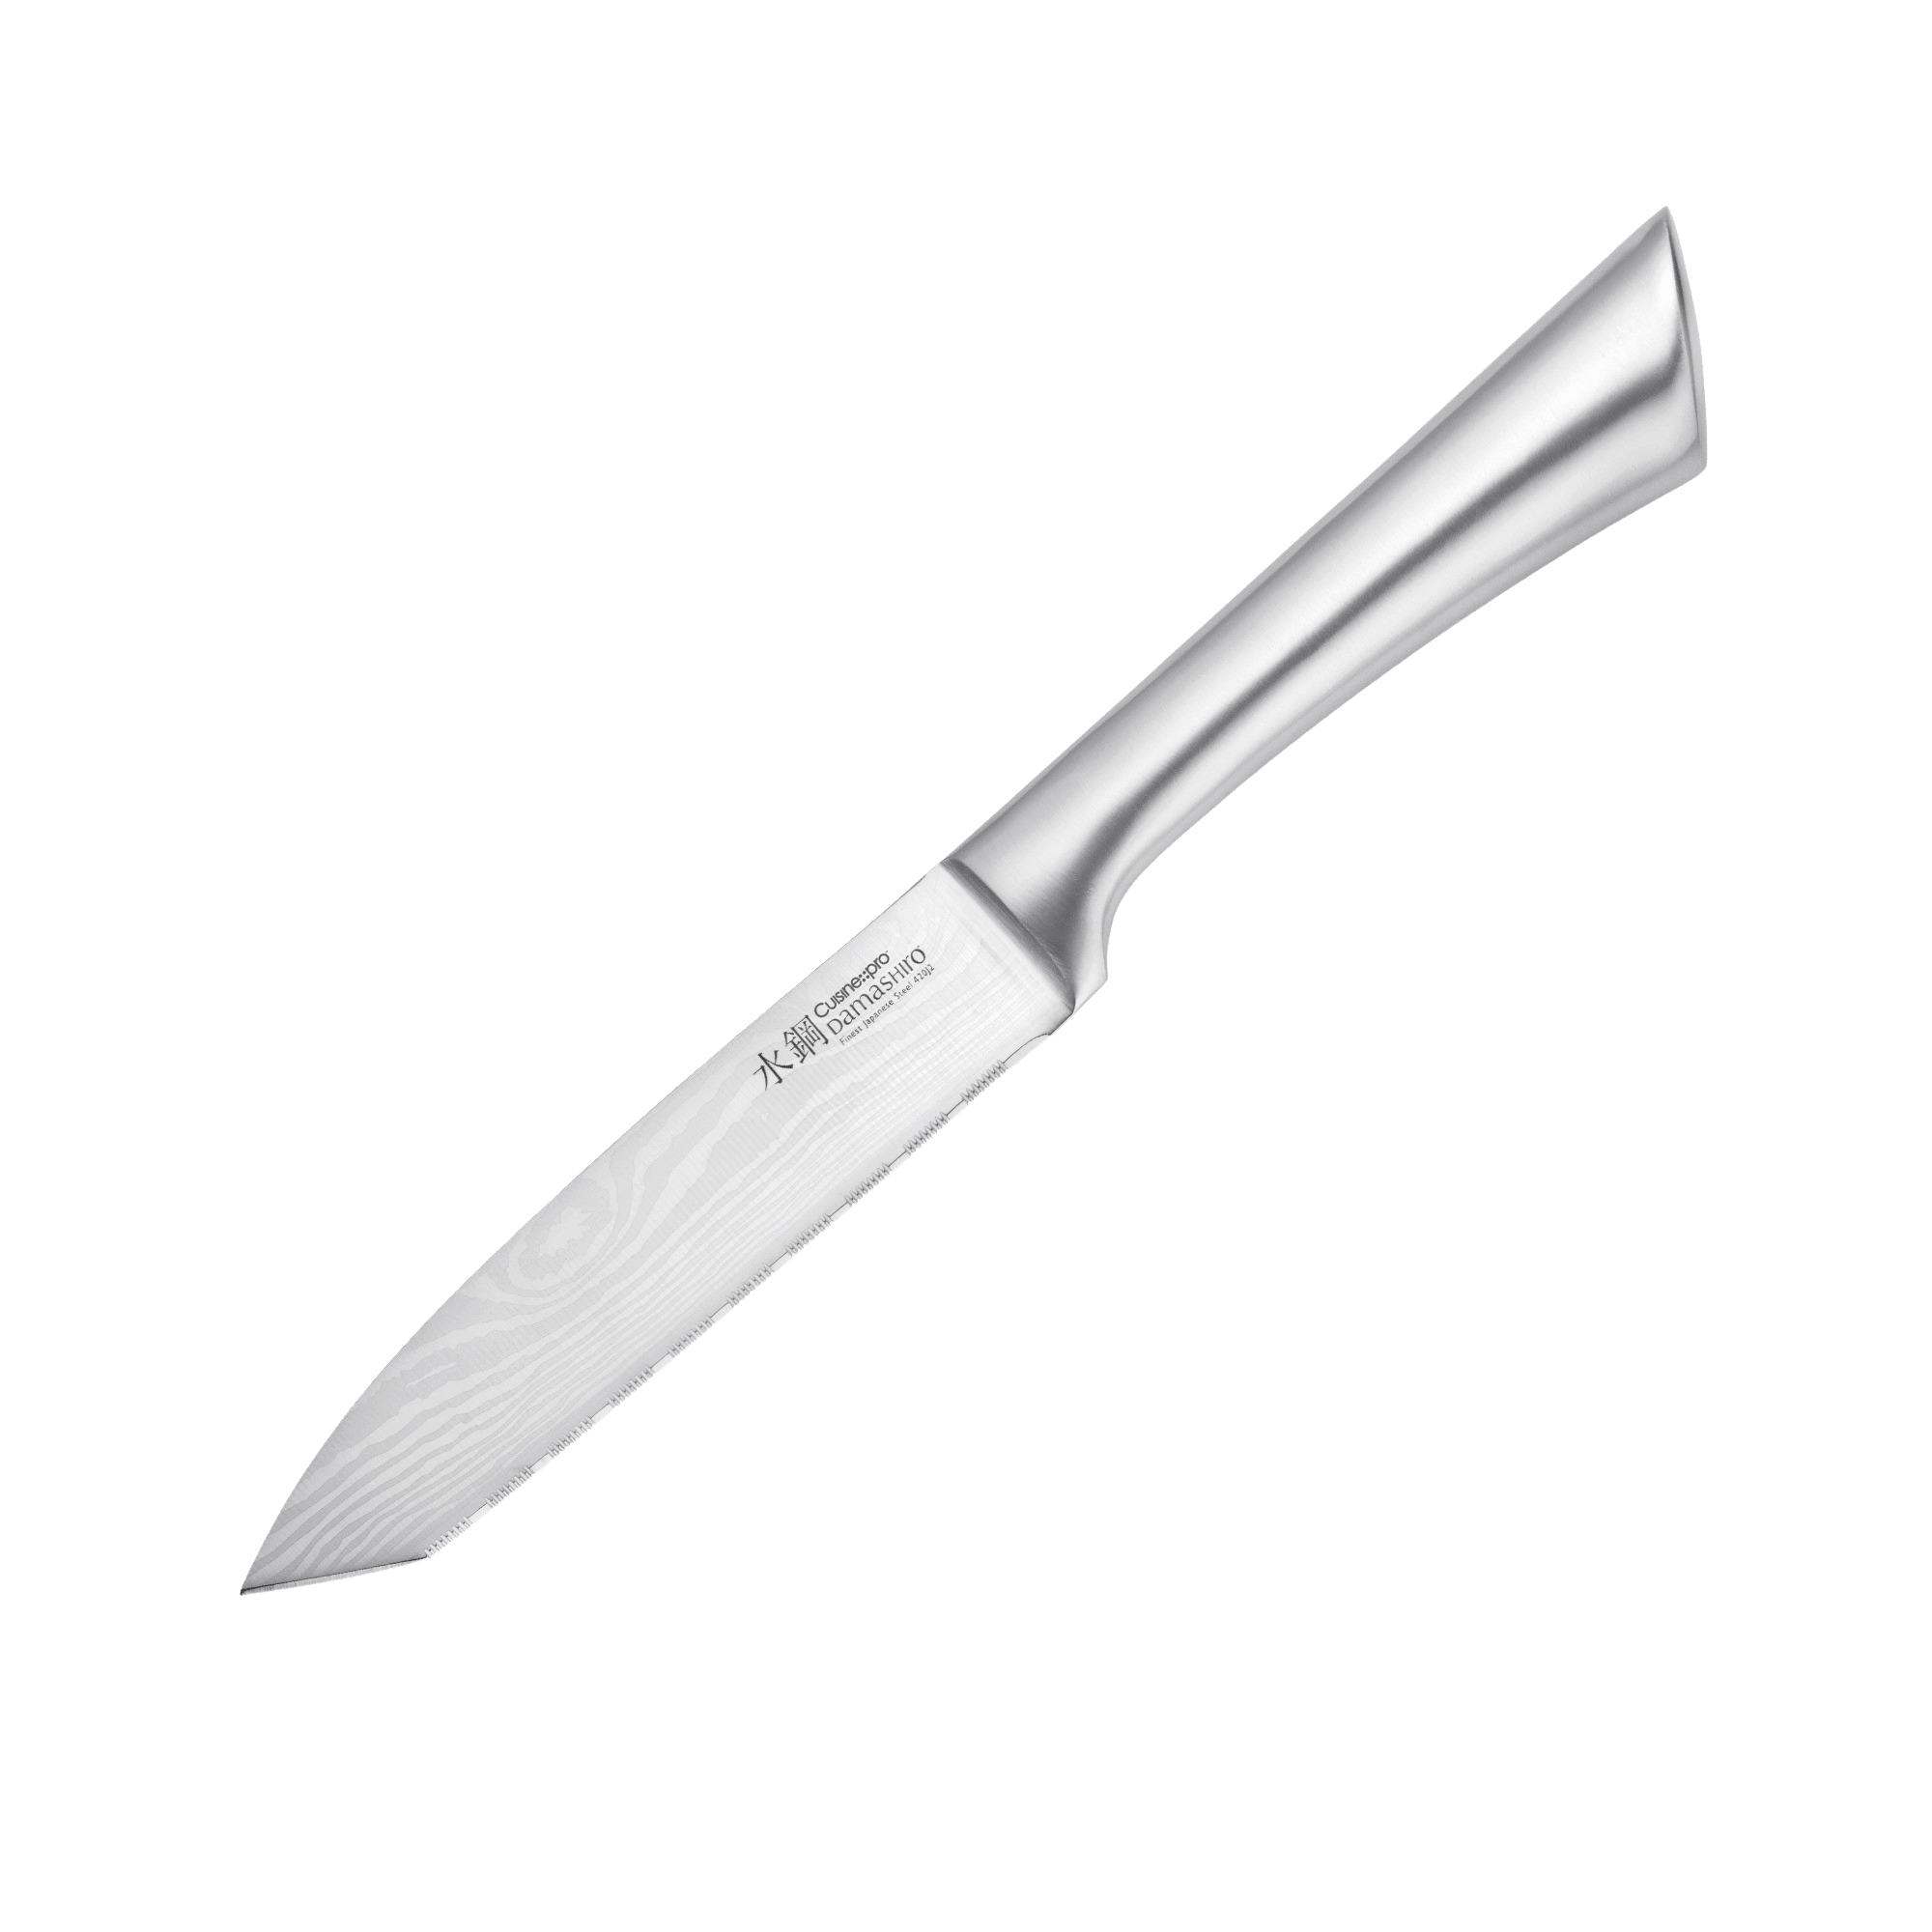 Cuisine::pro® Damashiro® All Purpose 'Try Me' Knife 14.5cm 5.5in-1032393